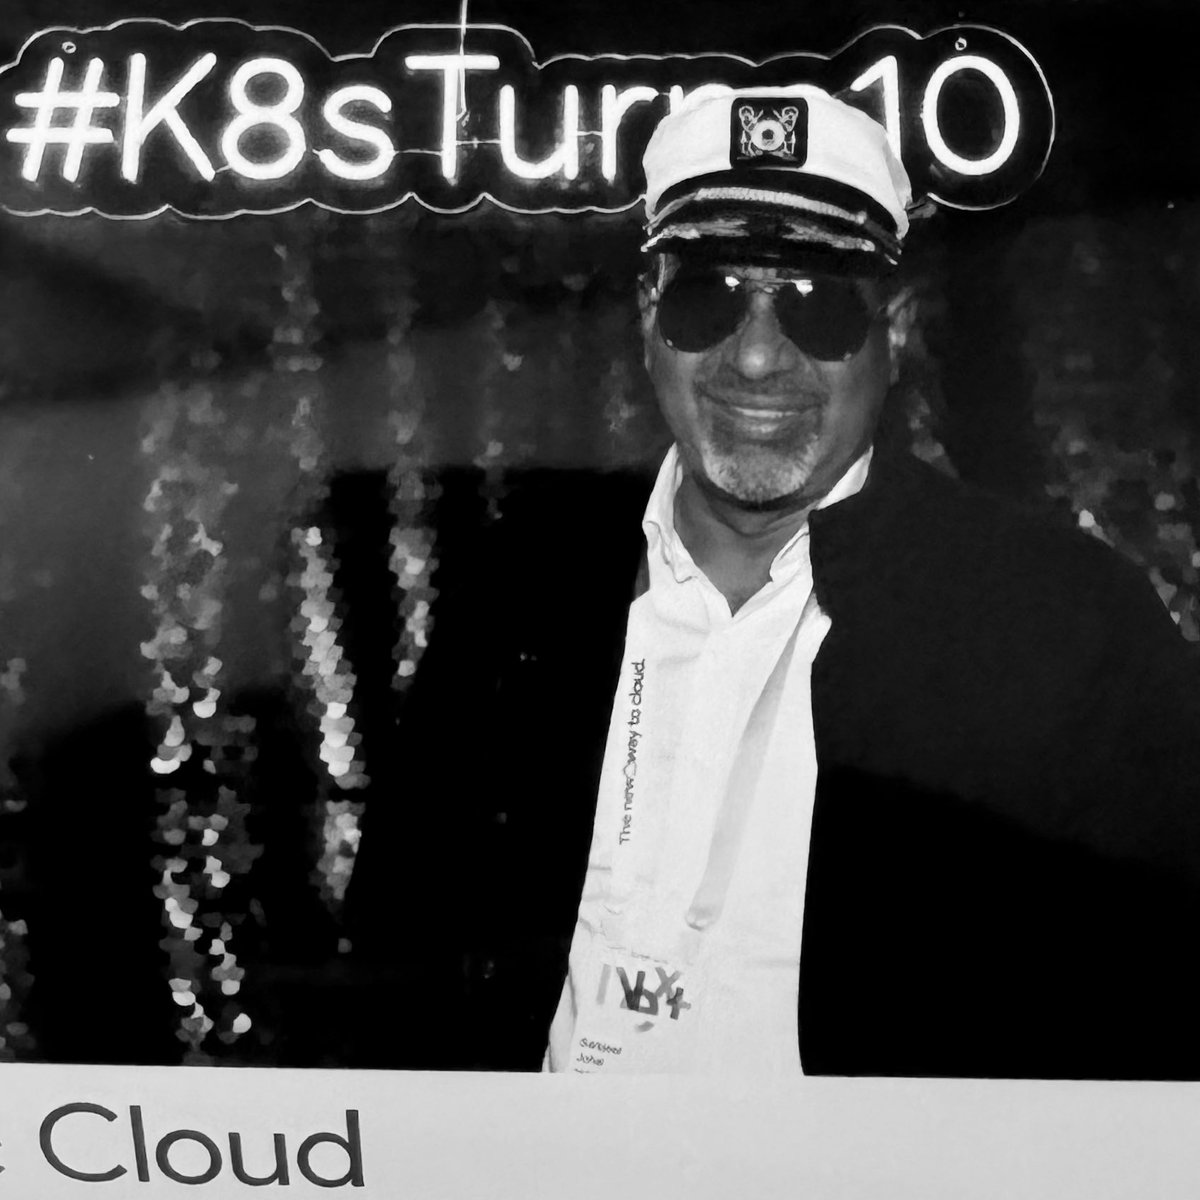 #Kubernetes is 10! A picture from the photo booth at the #K8s birthday celebration party earlier today! #K8sTurns10